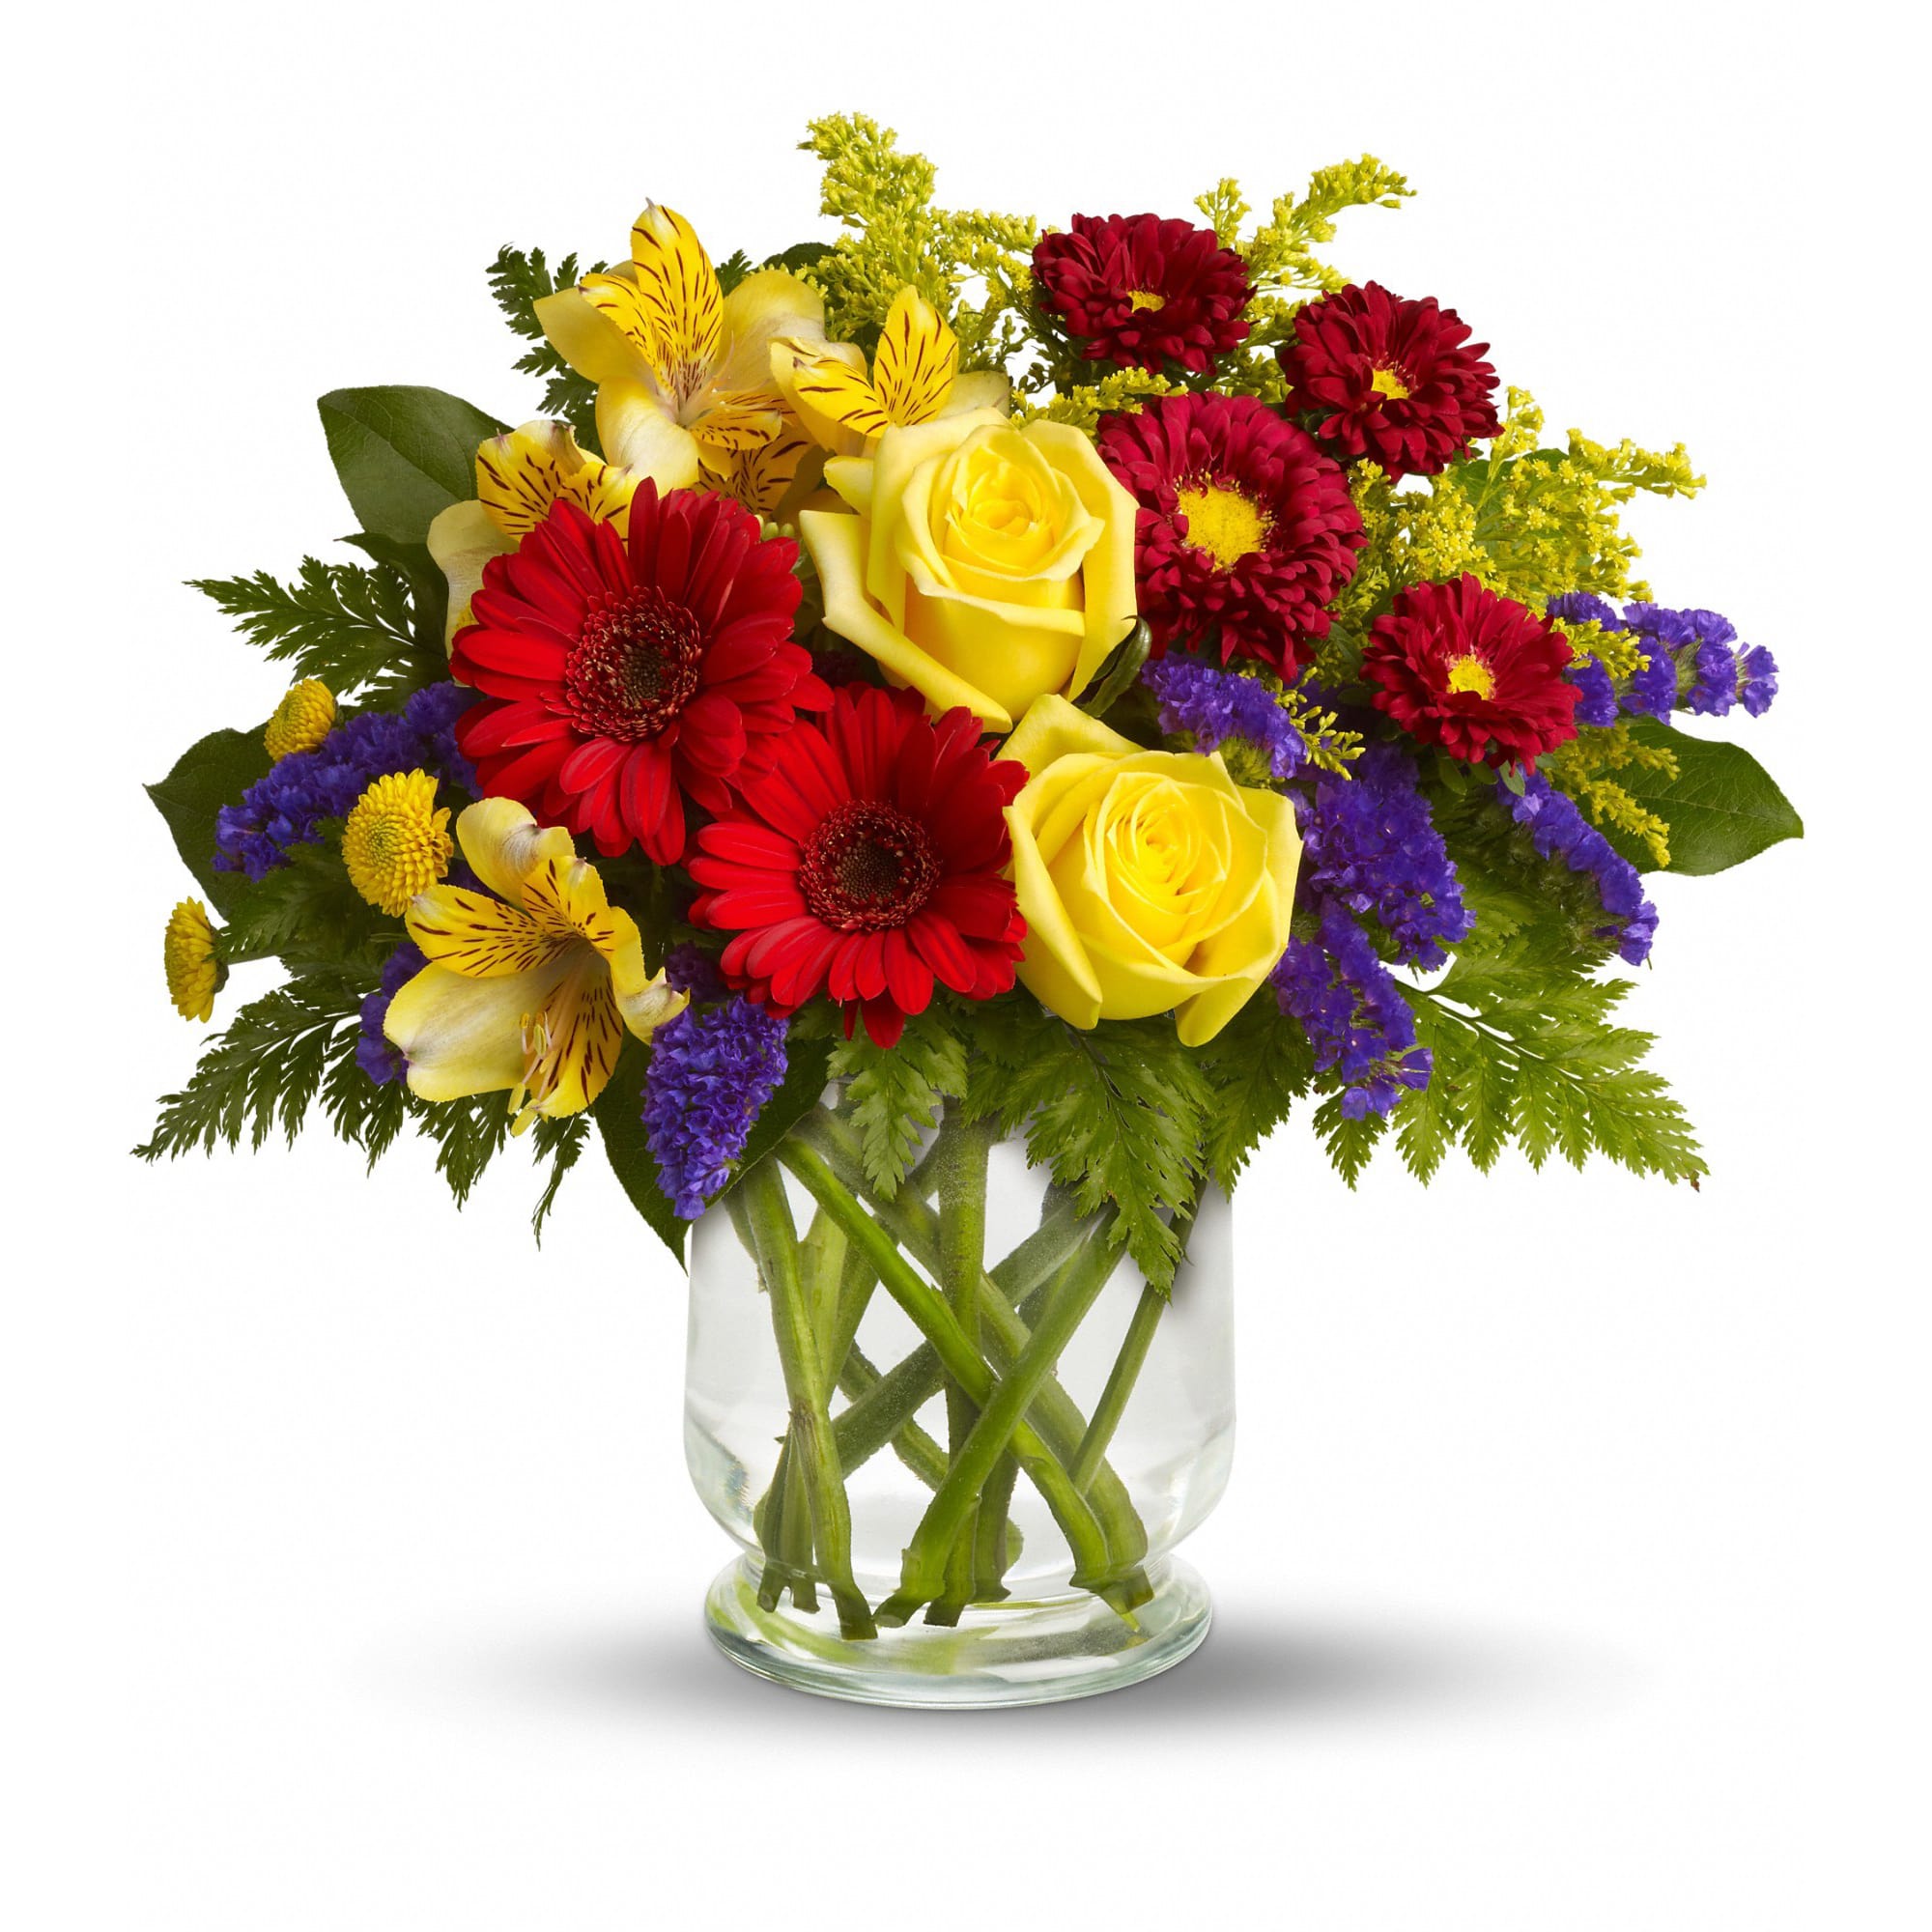 Garden Parade - You'll want to put this colorful bouquet on your hit parade of gifts to send. Bold primary colors and a perfect mix of flowers make it great for men and women of all ages. In other words, it's a perfect arrangement.